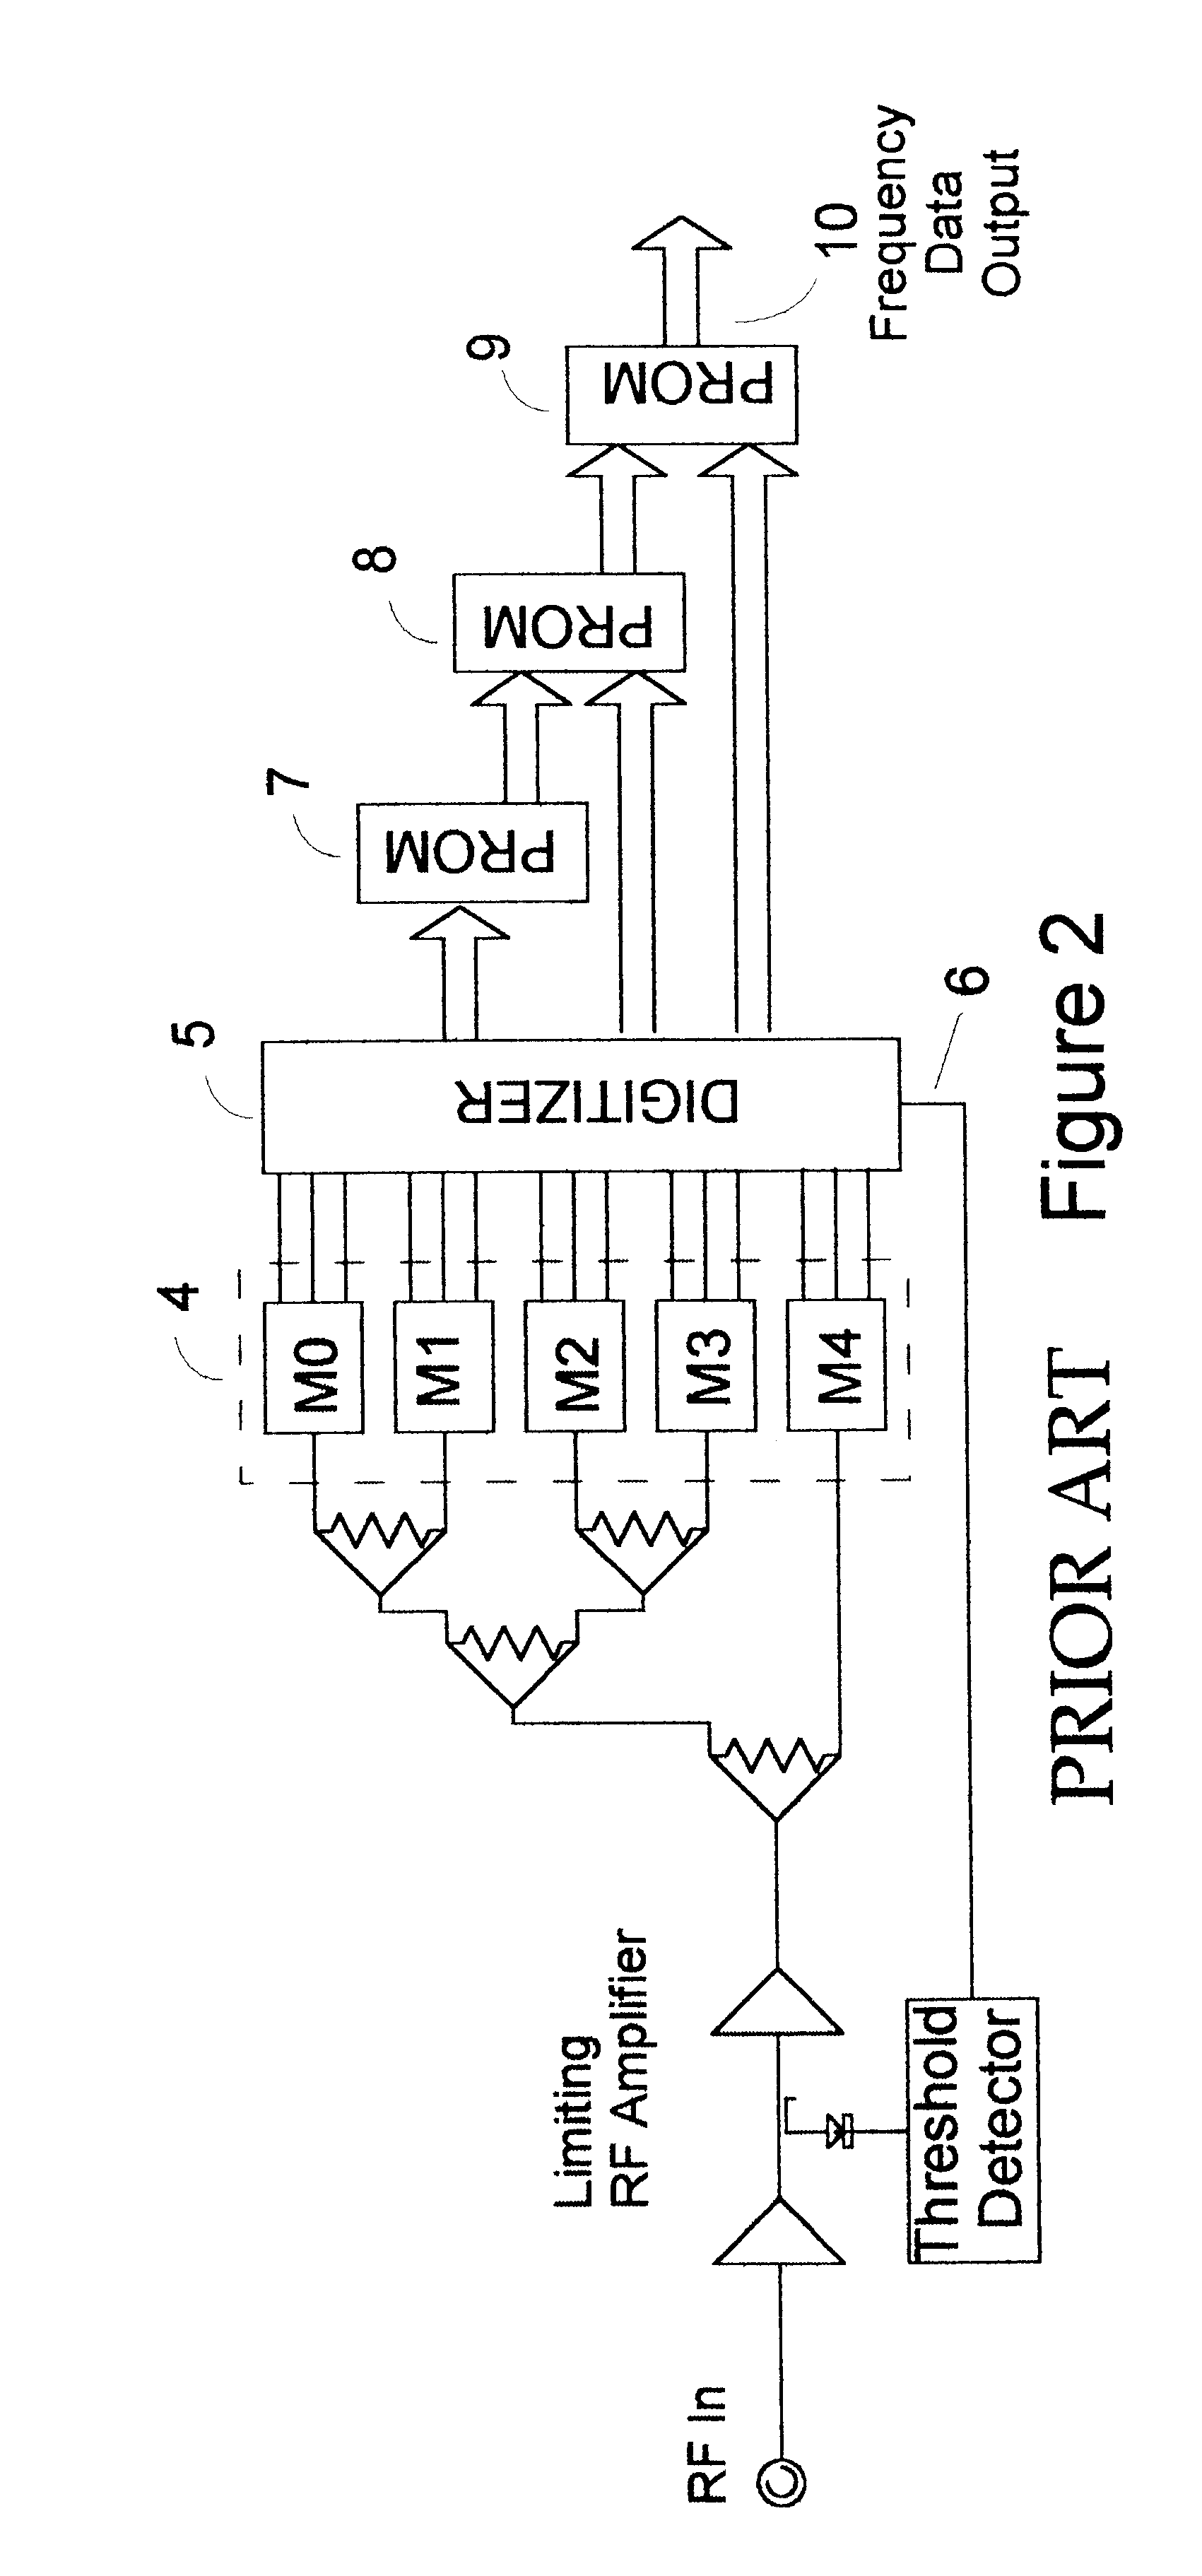 Method for instantaneous frequency measurement